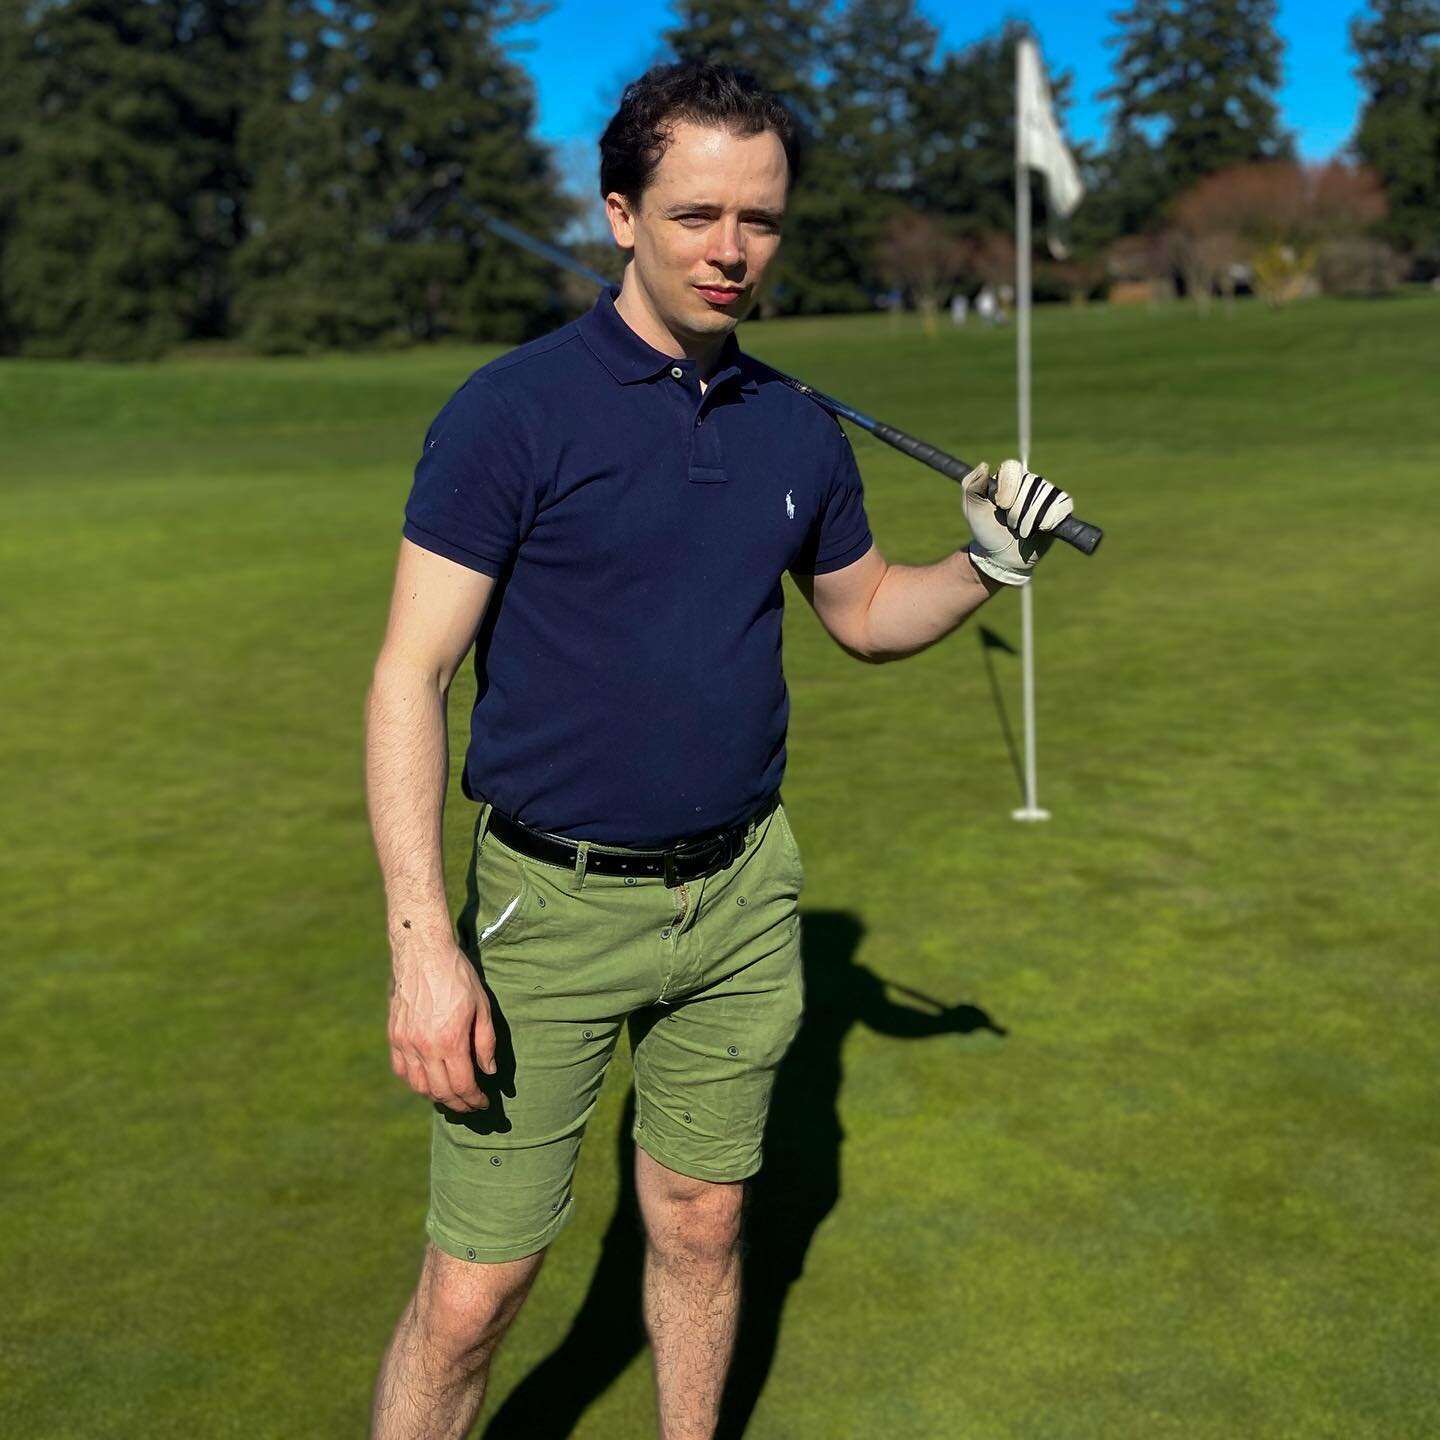 Look how confident sunscreen makes me&hellip;I had a great day in the sun today. I&rsquo;m spent! ⛳️ 🏌️&zwj;♂️ 
*
*
*
*
#golfing #spring #springtime #white #fairskin #ralphlauren #ping #portland #pnw #sunshine #sunnyday #poloralphlauren #poloseason